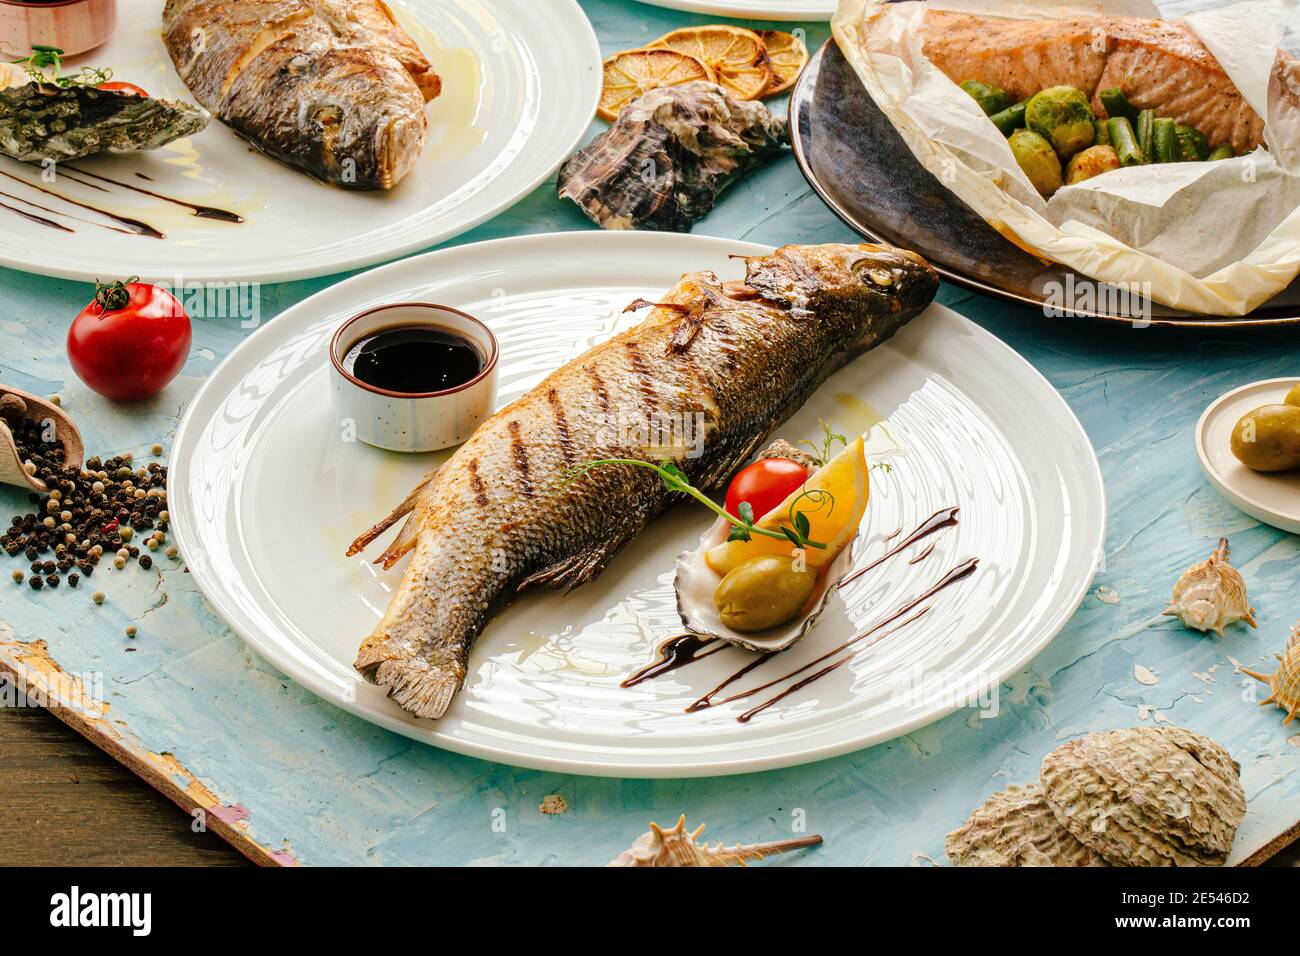 Gourmet grilled sea bass fish on the served table Stock Photo